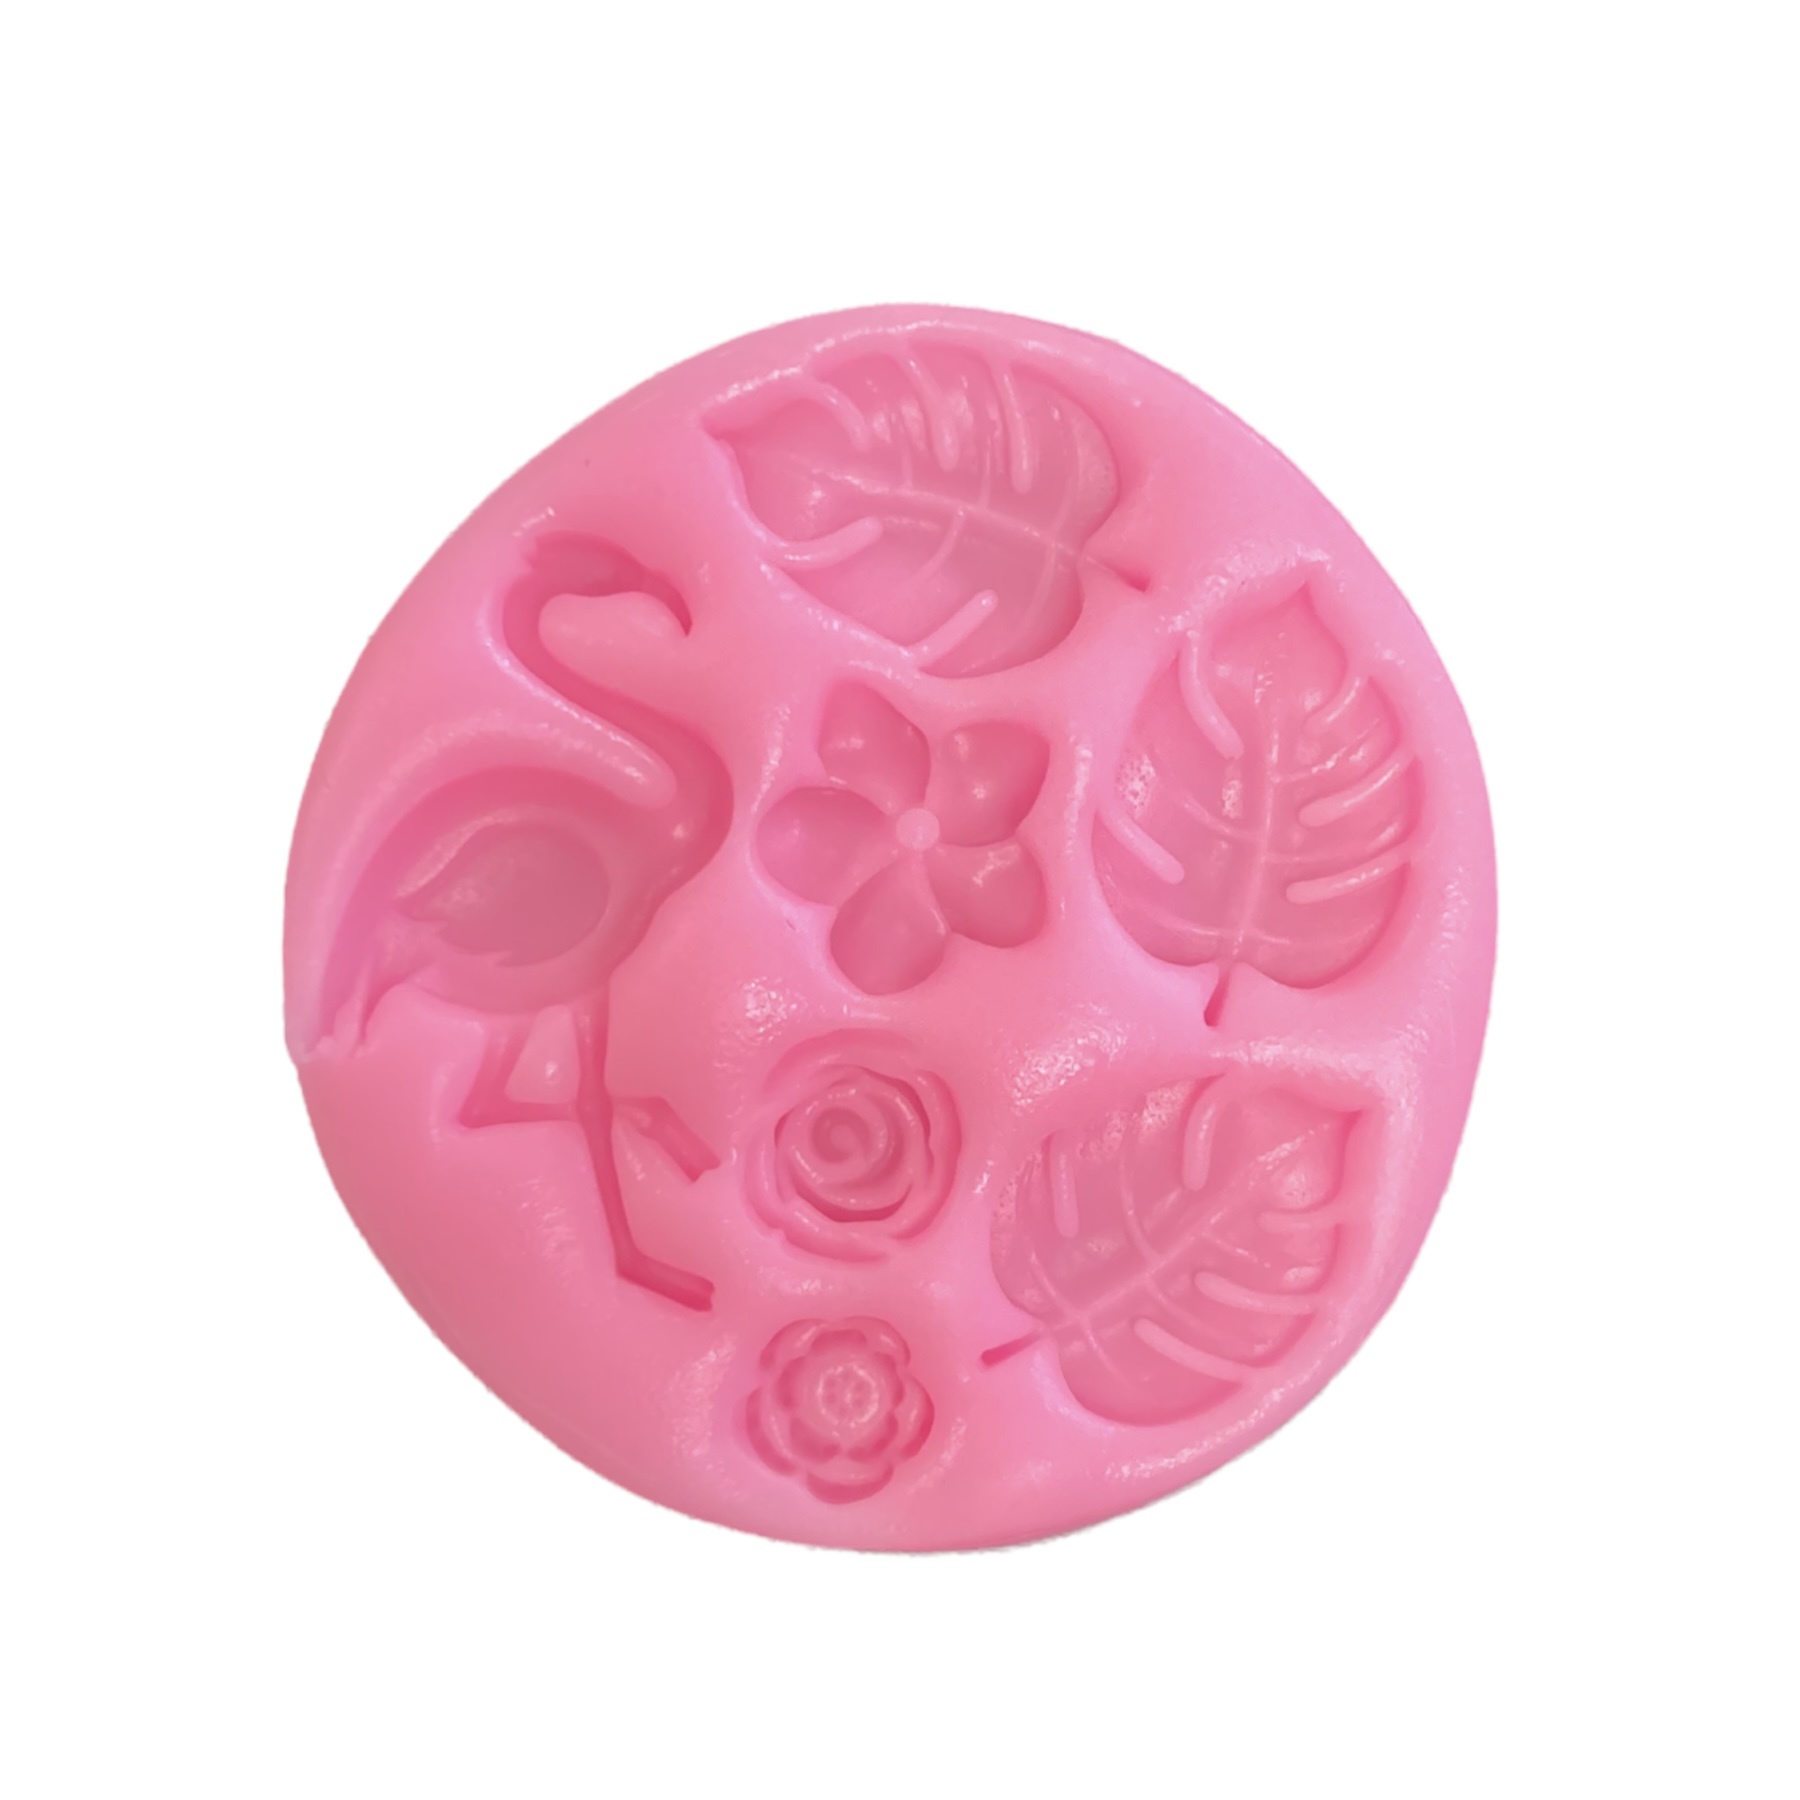 TROPICAL LEAF / FLAMINGO AND FLOWER SILICONE MOLD